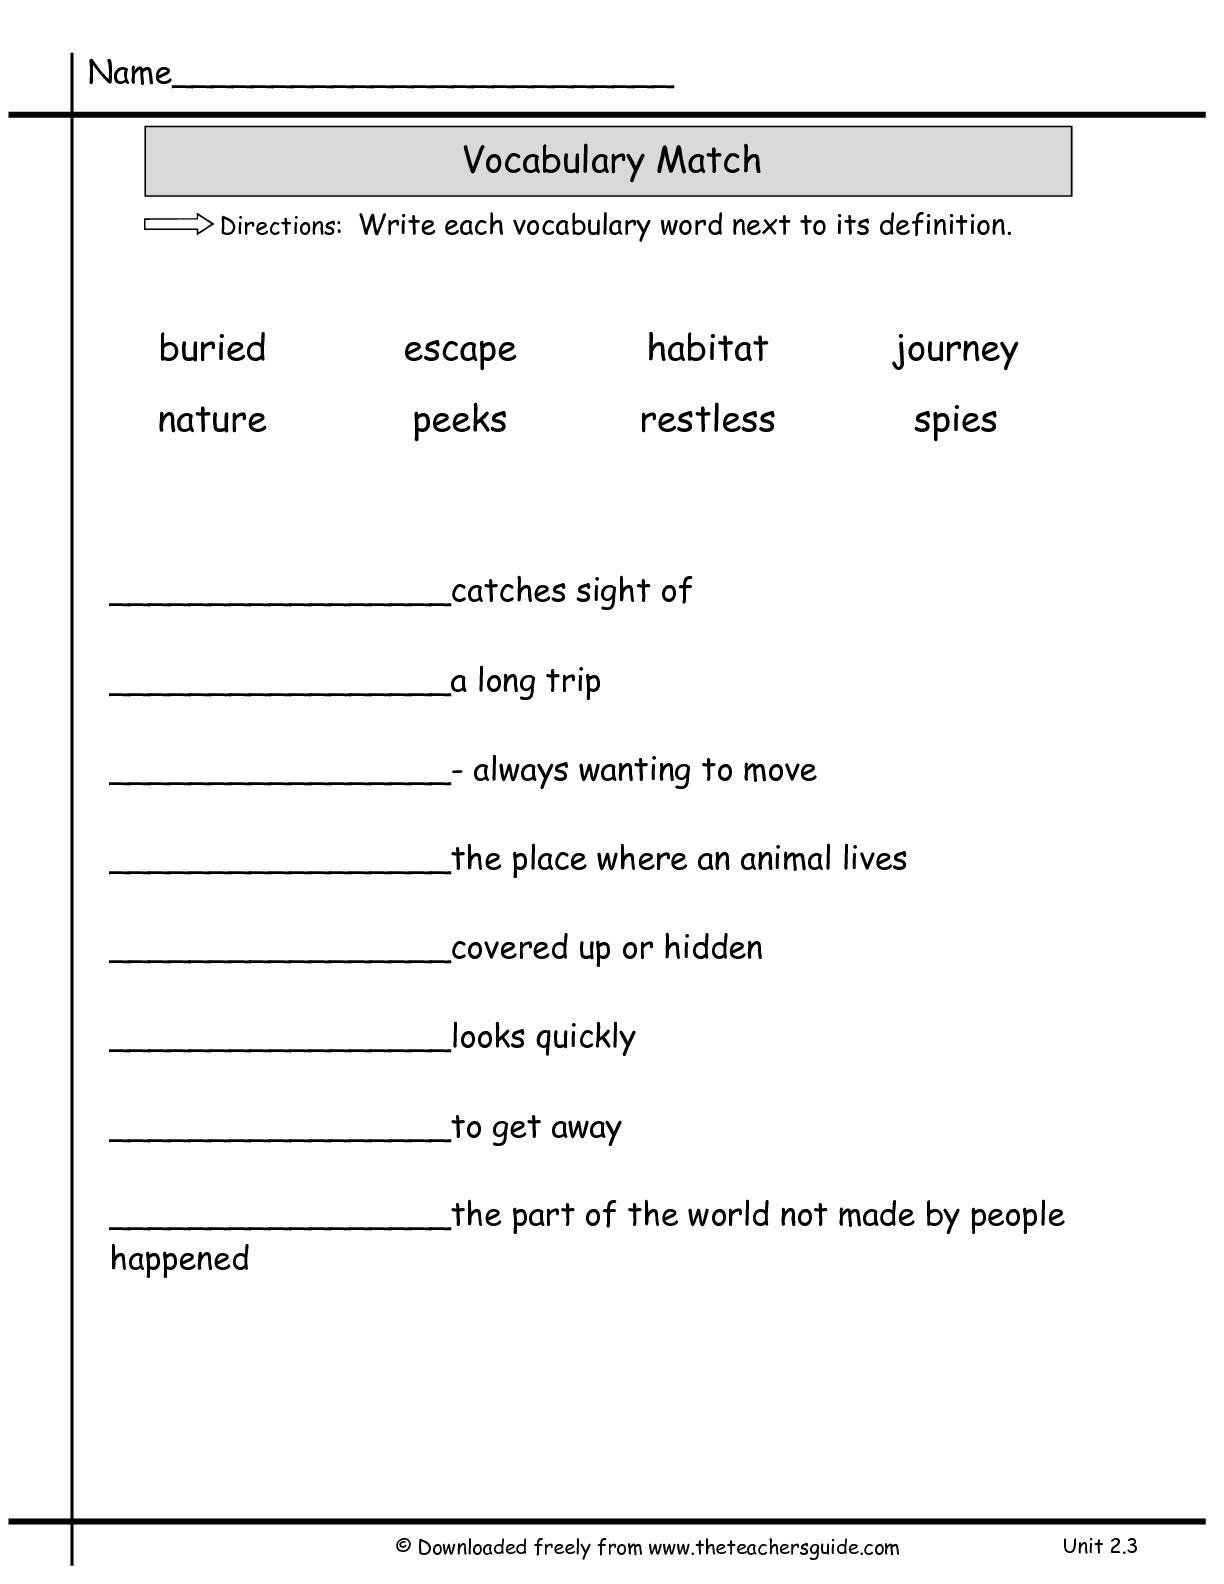 15-best-images-of-word-definition-worksheets-2nd-grade-vocabulary